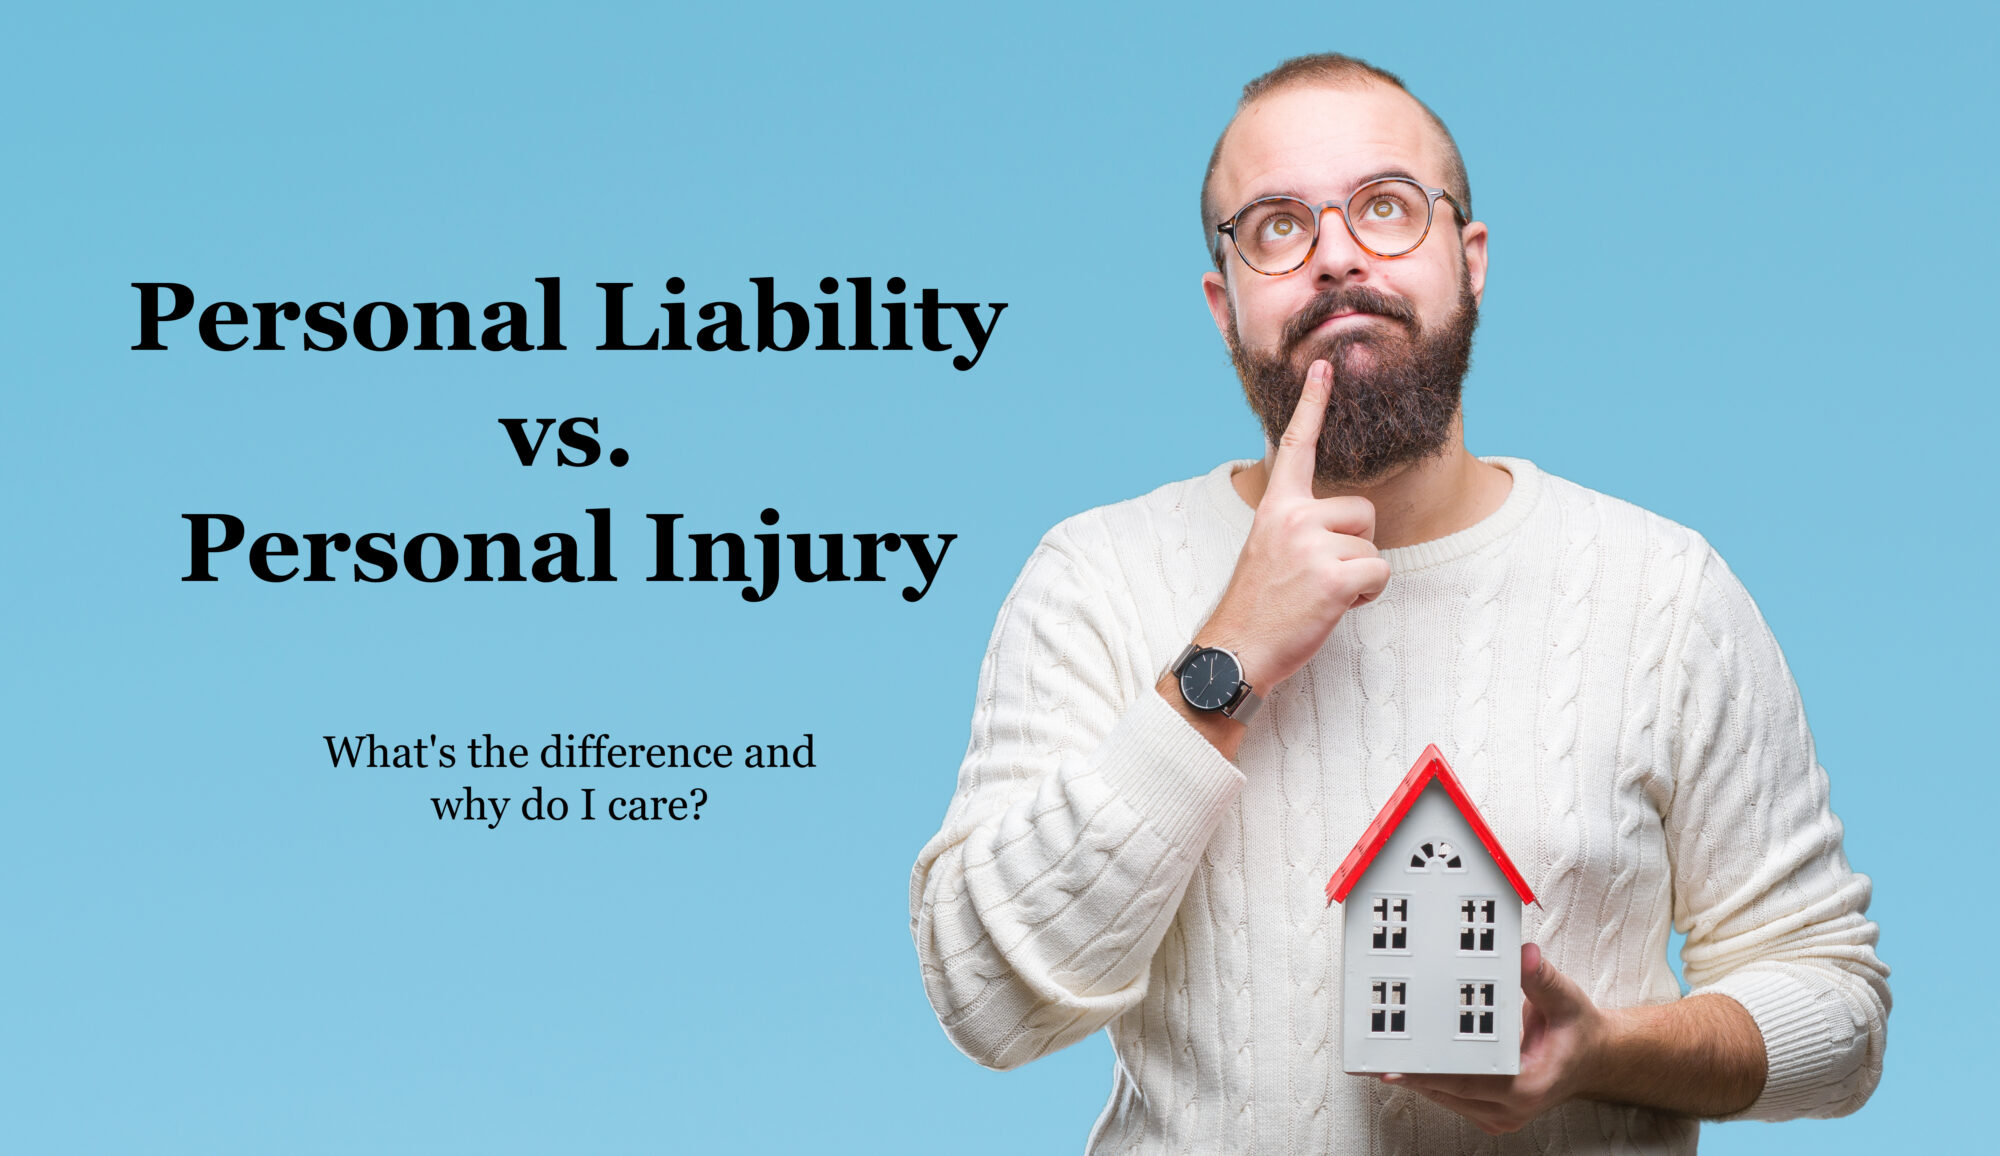 Personal Injury vs. Personal Liability